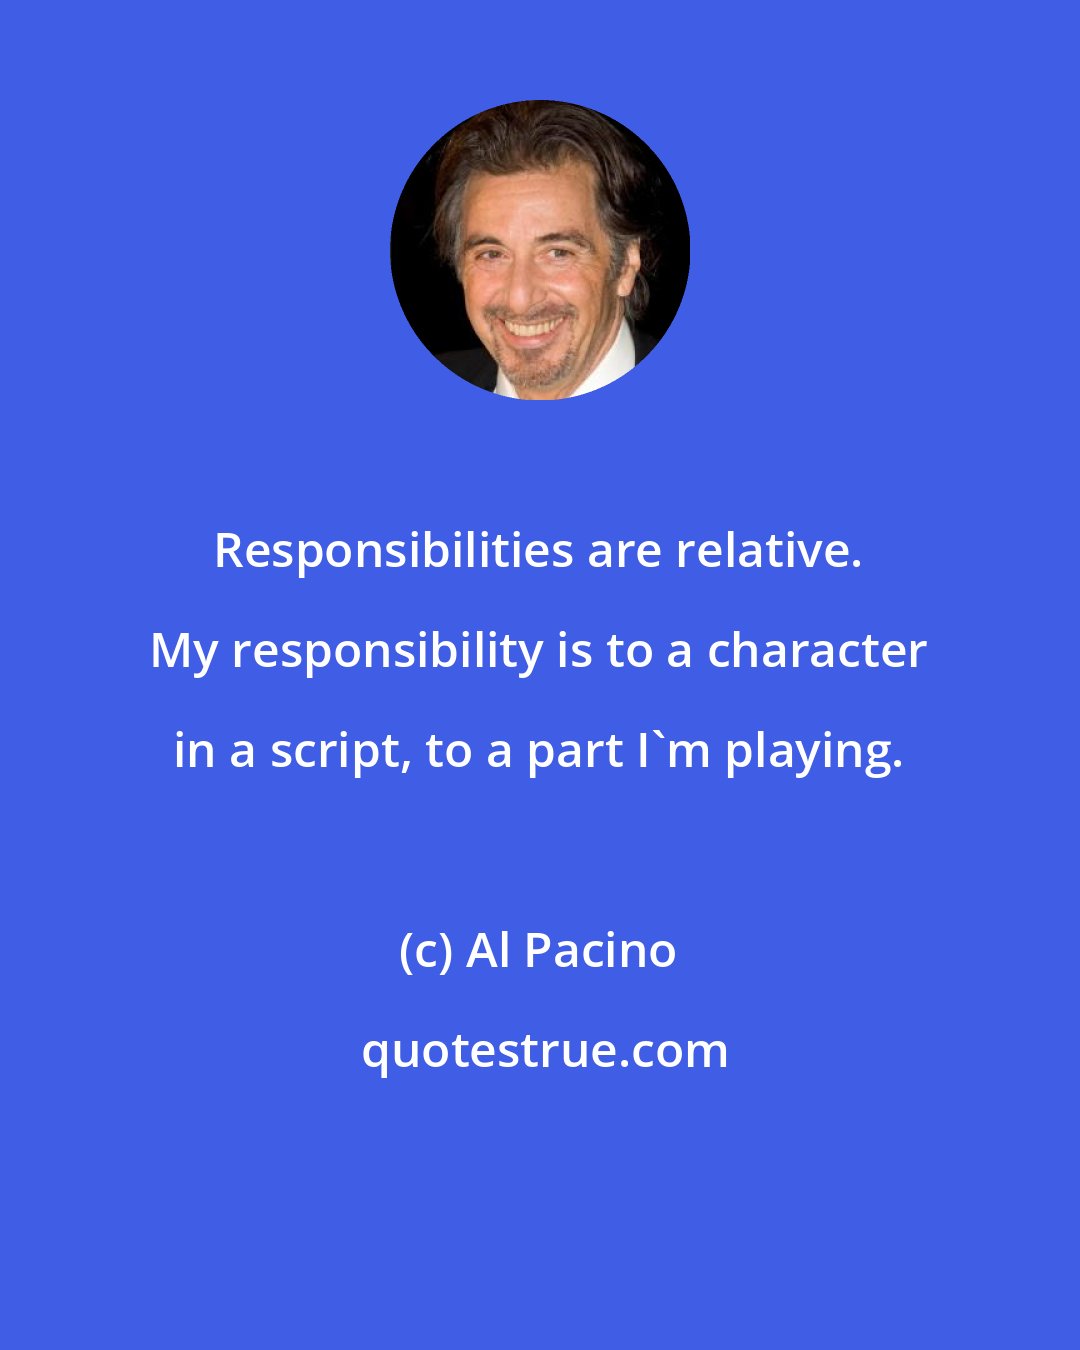 Al Pacino: Responsibilities are relative. My responsibility is to a character in a script, to a part I'm playing.